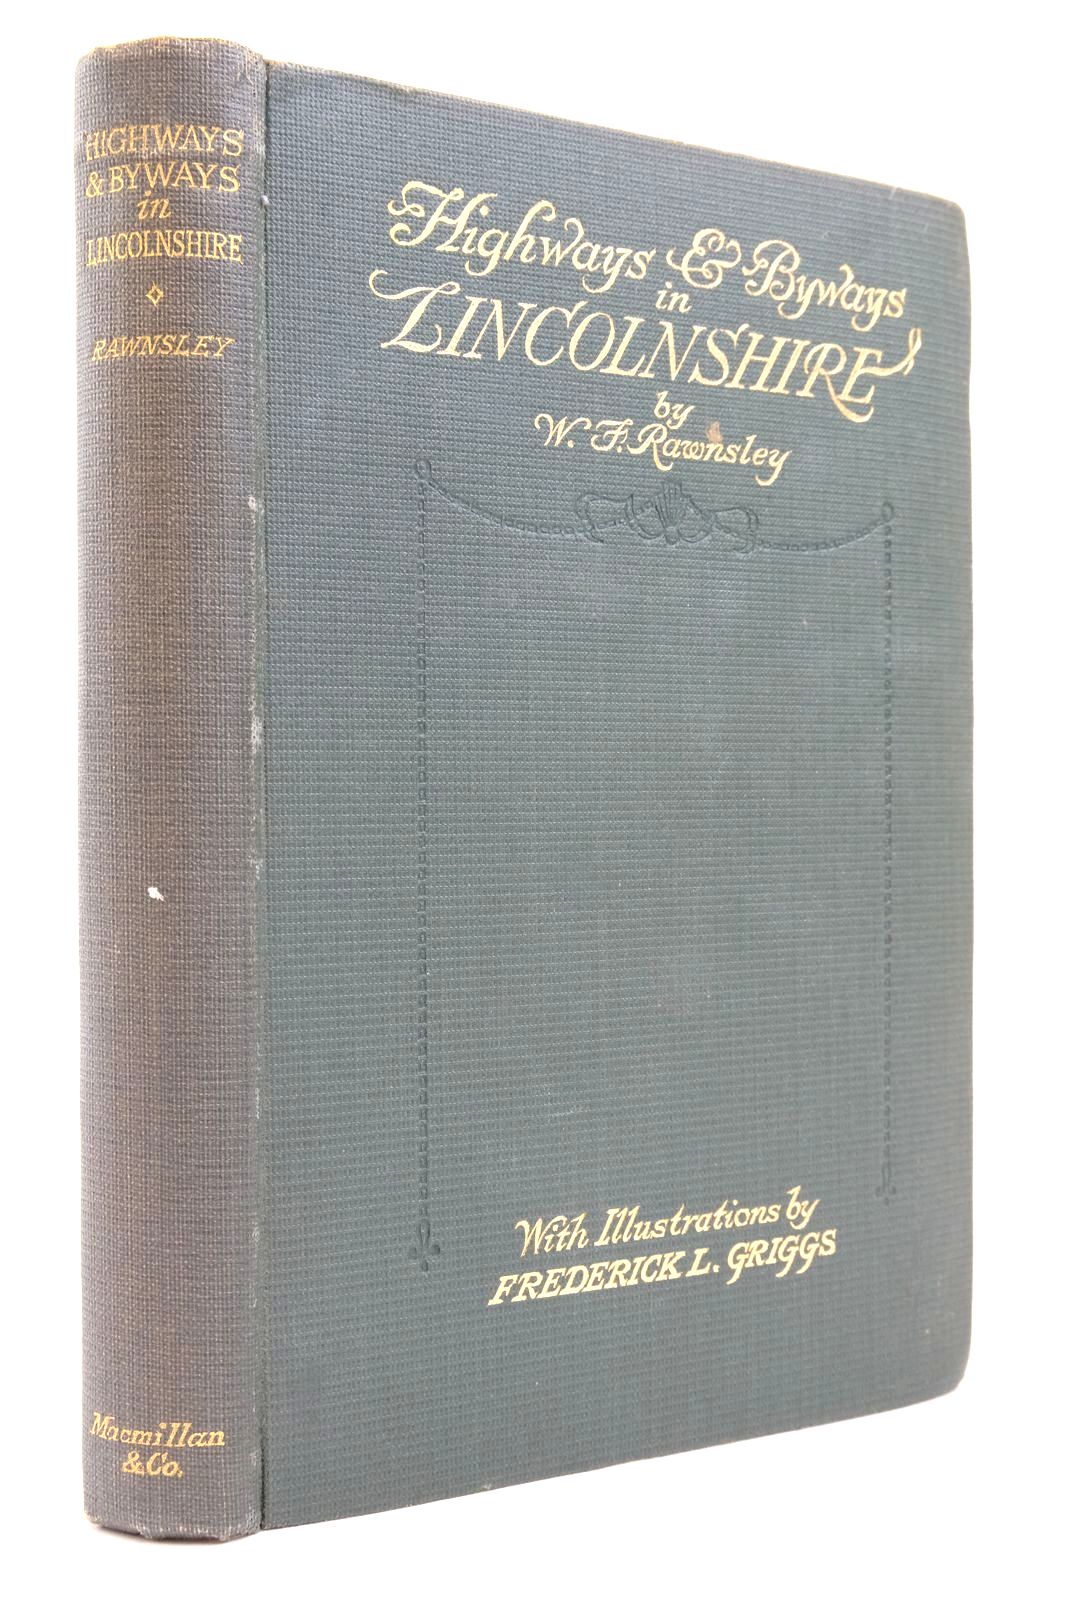 Photo of HIGHWAYS AND BYWAYS IN LINCOLNSHIRE written by Rawnsley, Willingham Franklin illustrated by Griggs, Frederick L. (STOCK CODE: 2137608)  for sale by Stella & Rose's Books